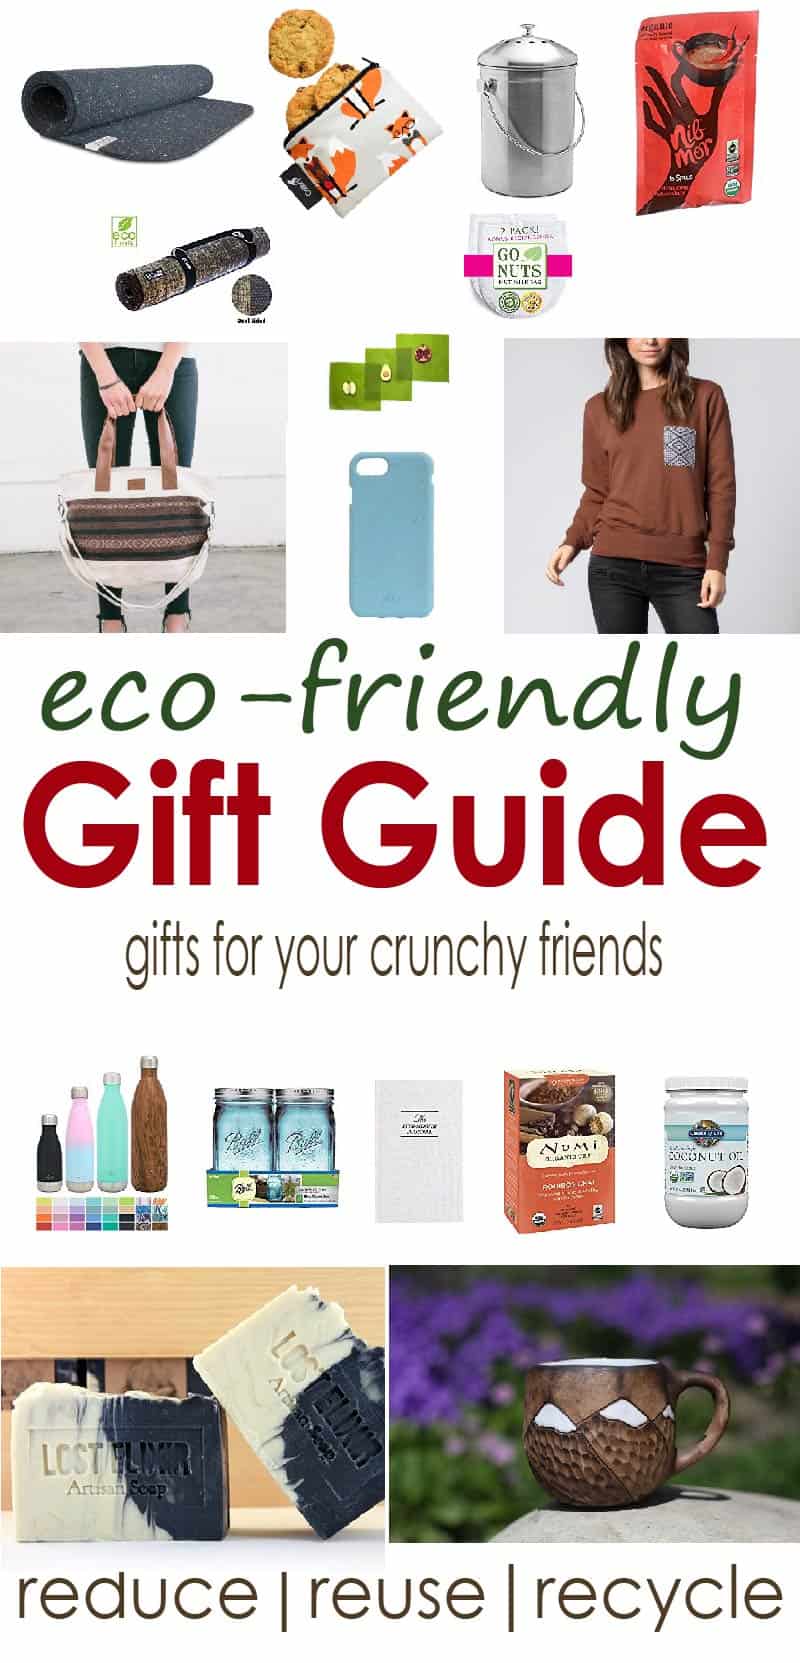 Made for your crunchy friend that's into meditation and saving the earth, these eco friendly gifts are recycled, hand made, and sustainable.